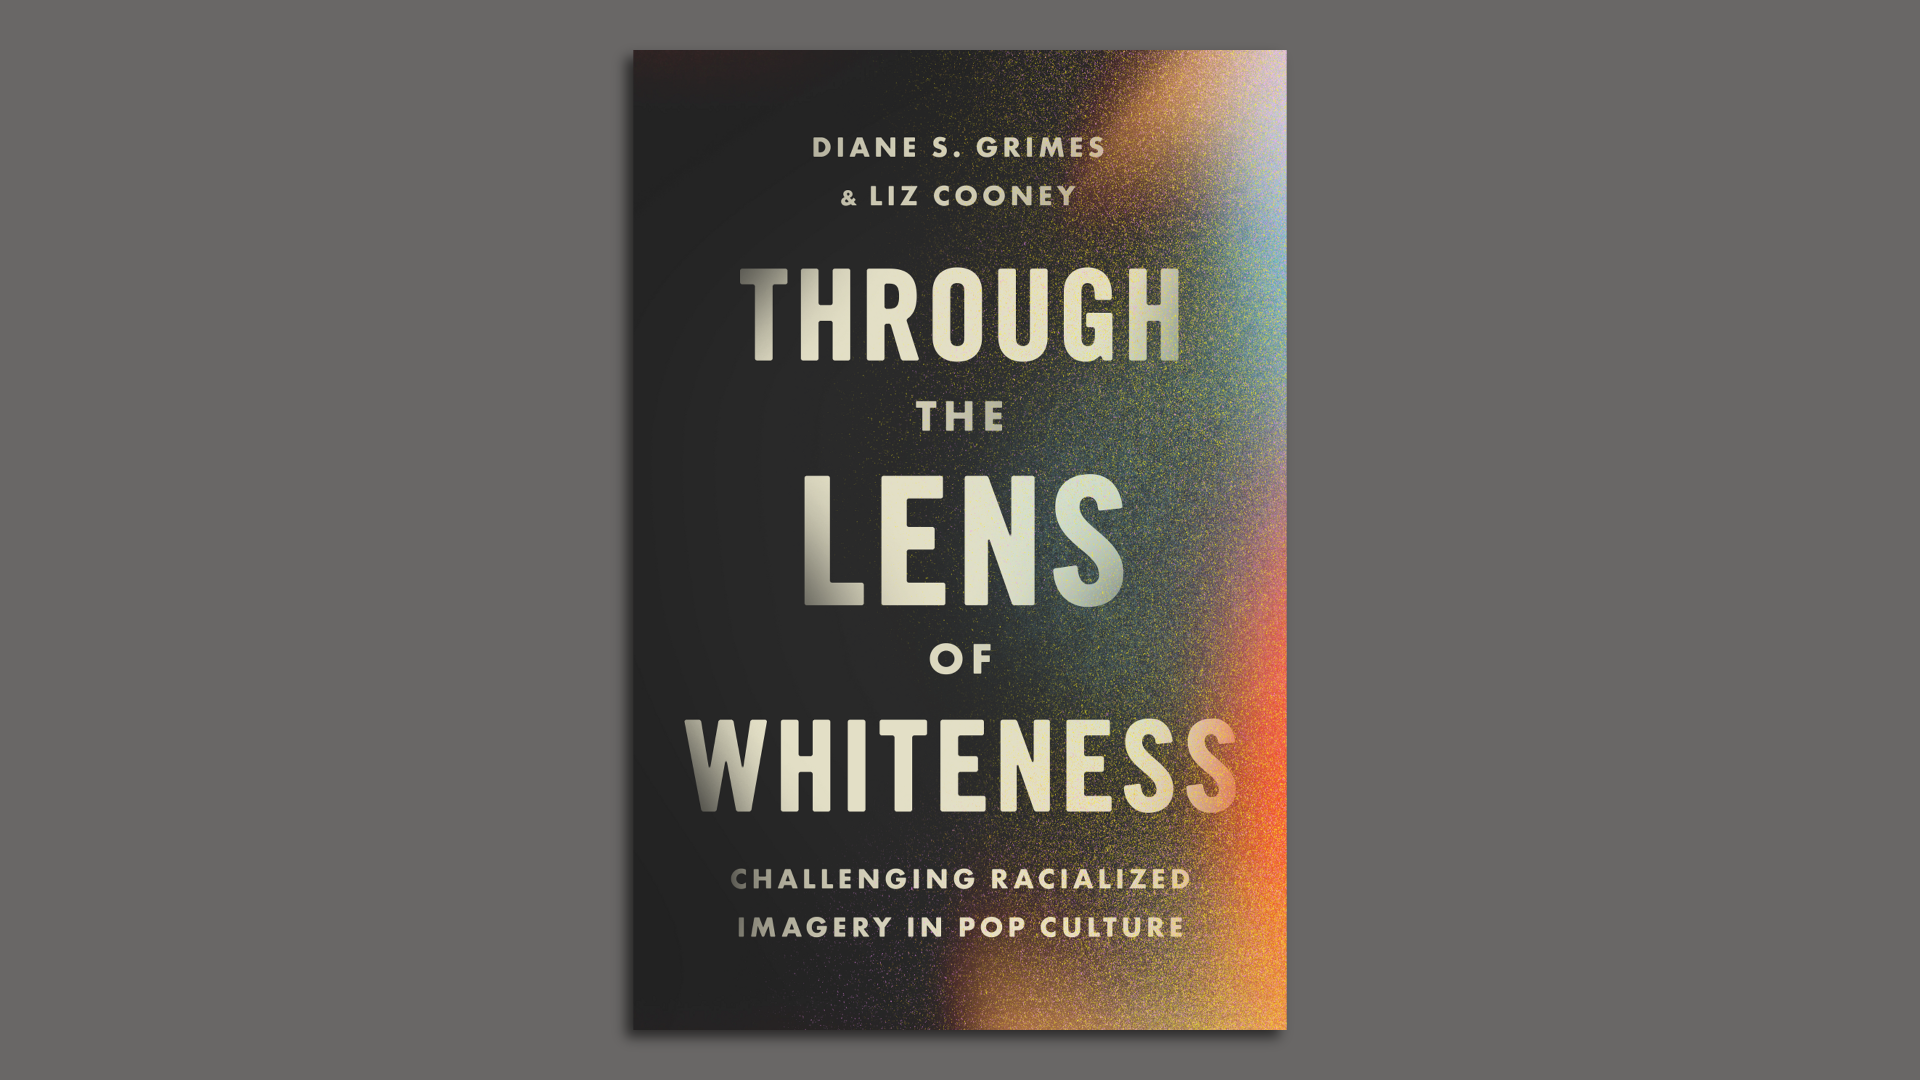 A book cover that says "Through the Lens of Whiteness"